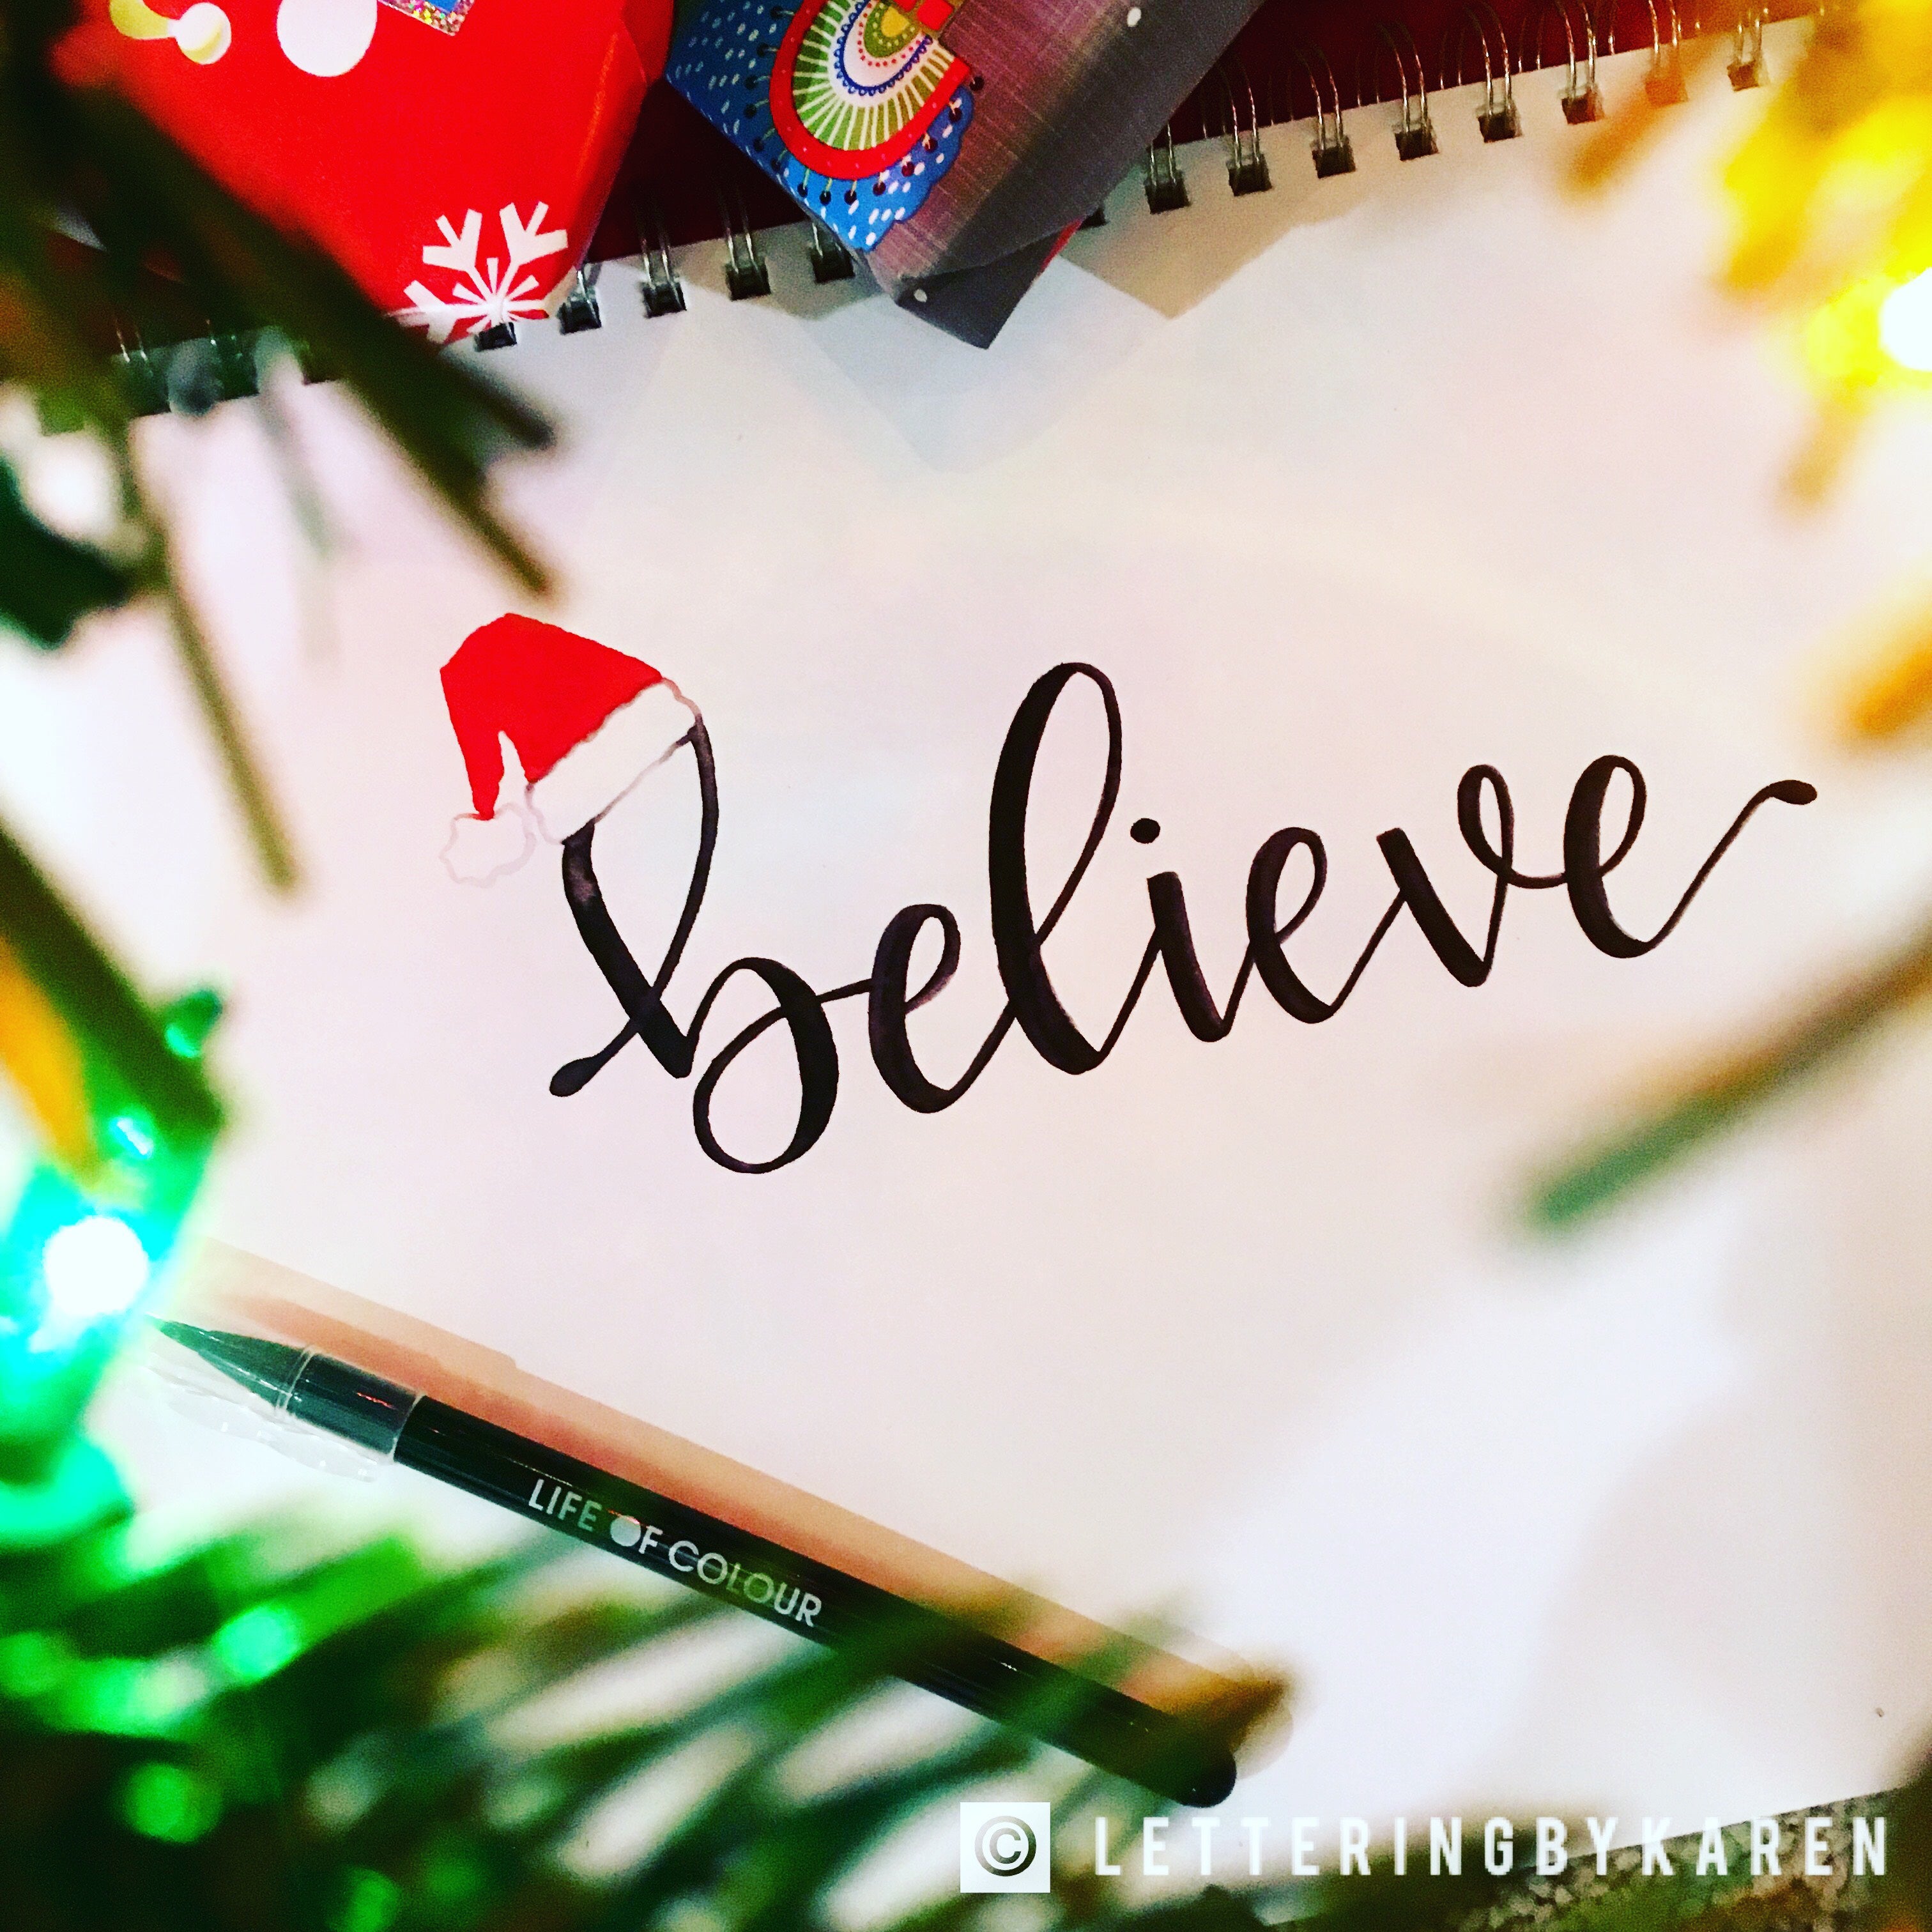 believe brush lettering with life of colour pens